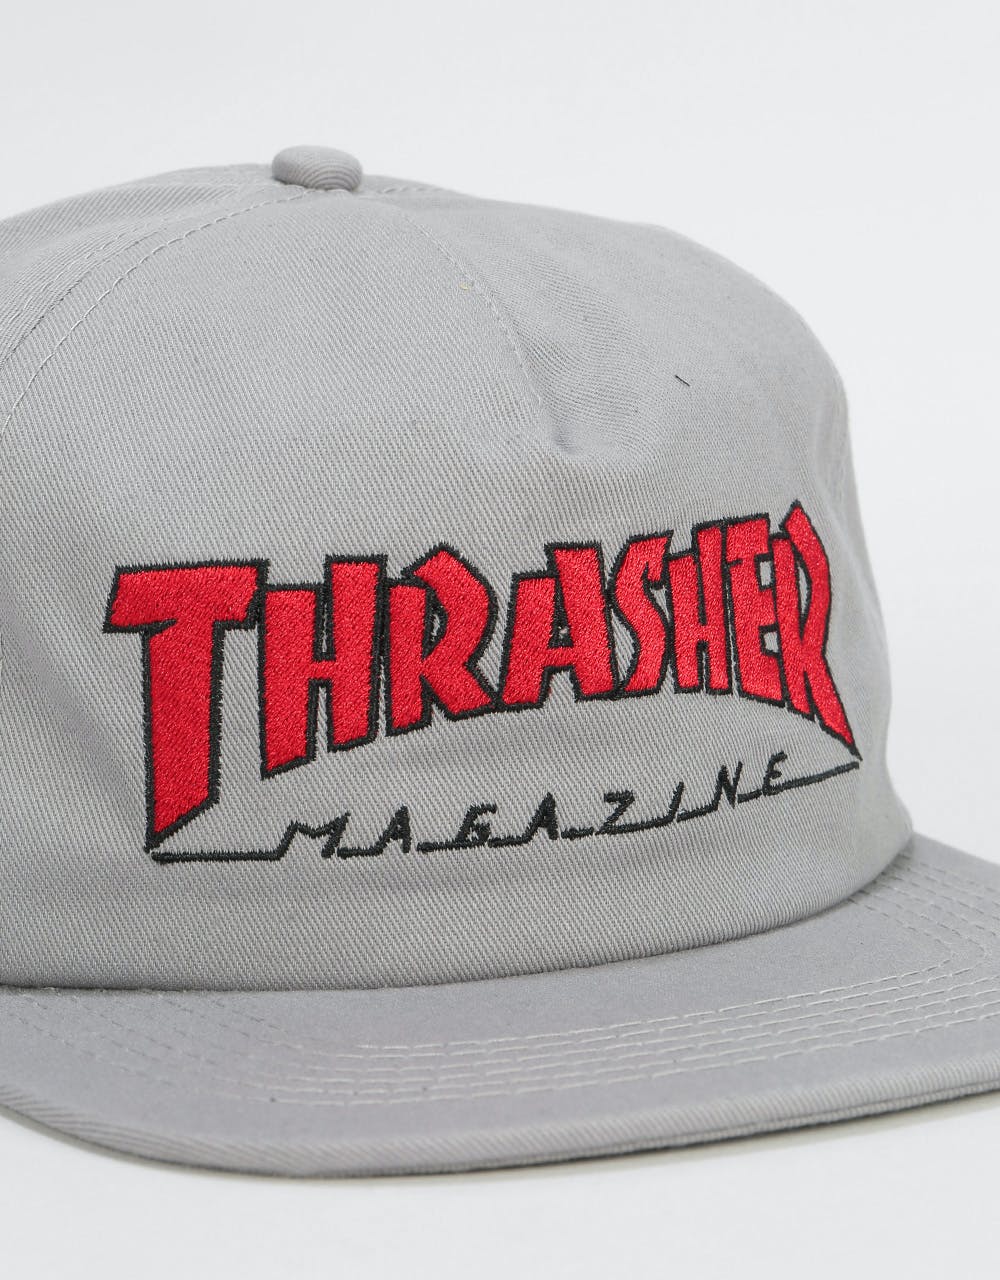 Thrasher Outlined Snapback Cap - Grey/Red